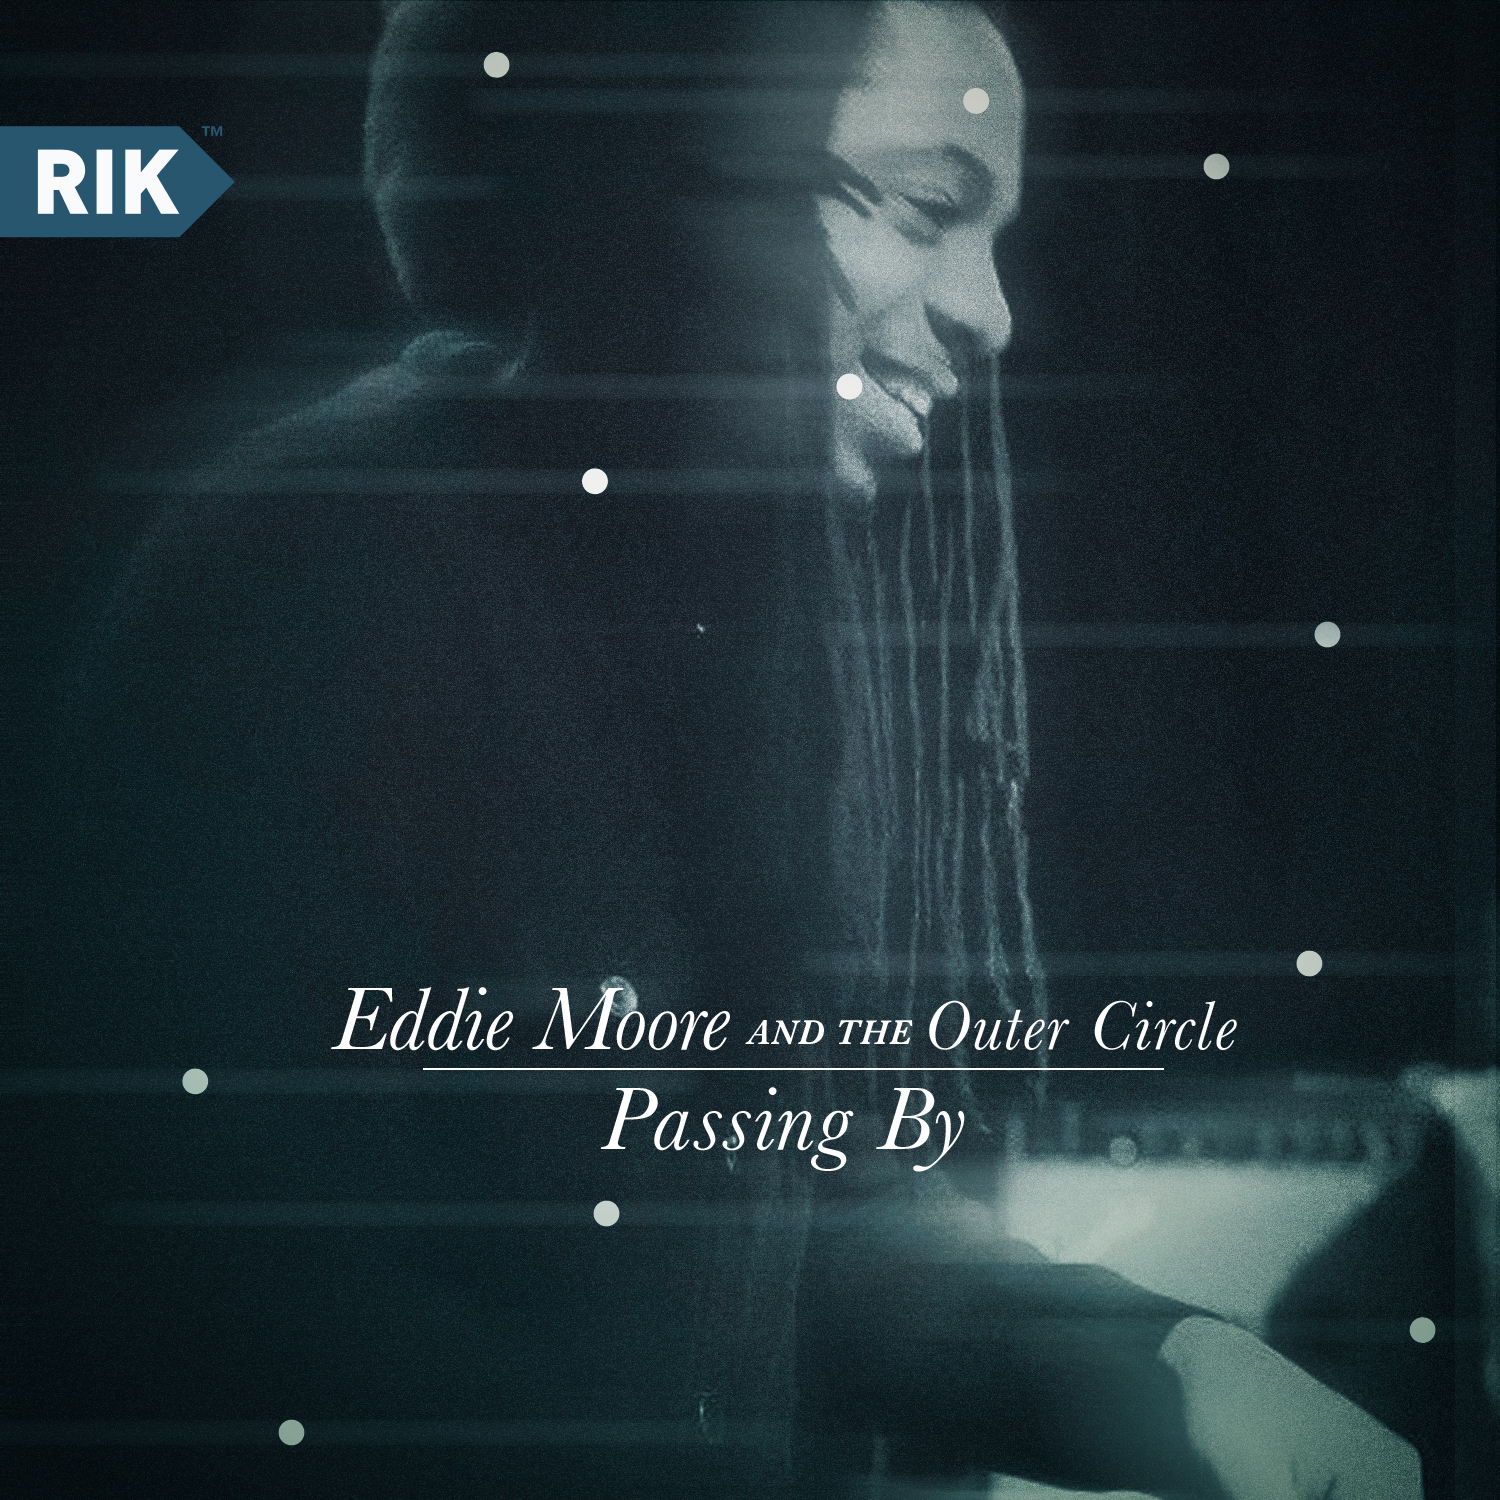 Eddie Moore and The Outer Circle <br> “Passing By”